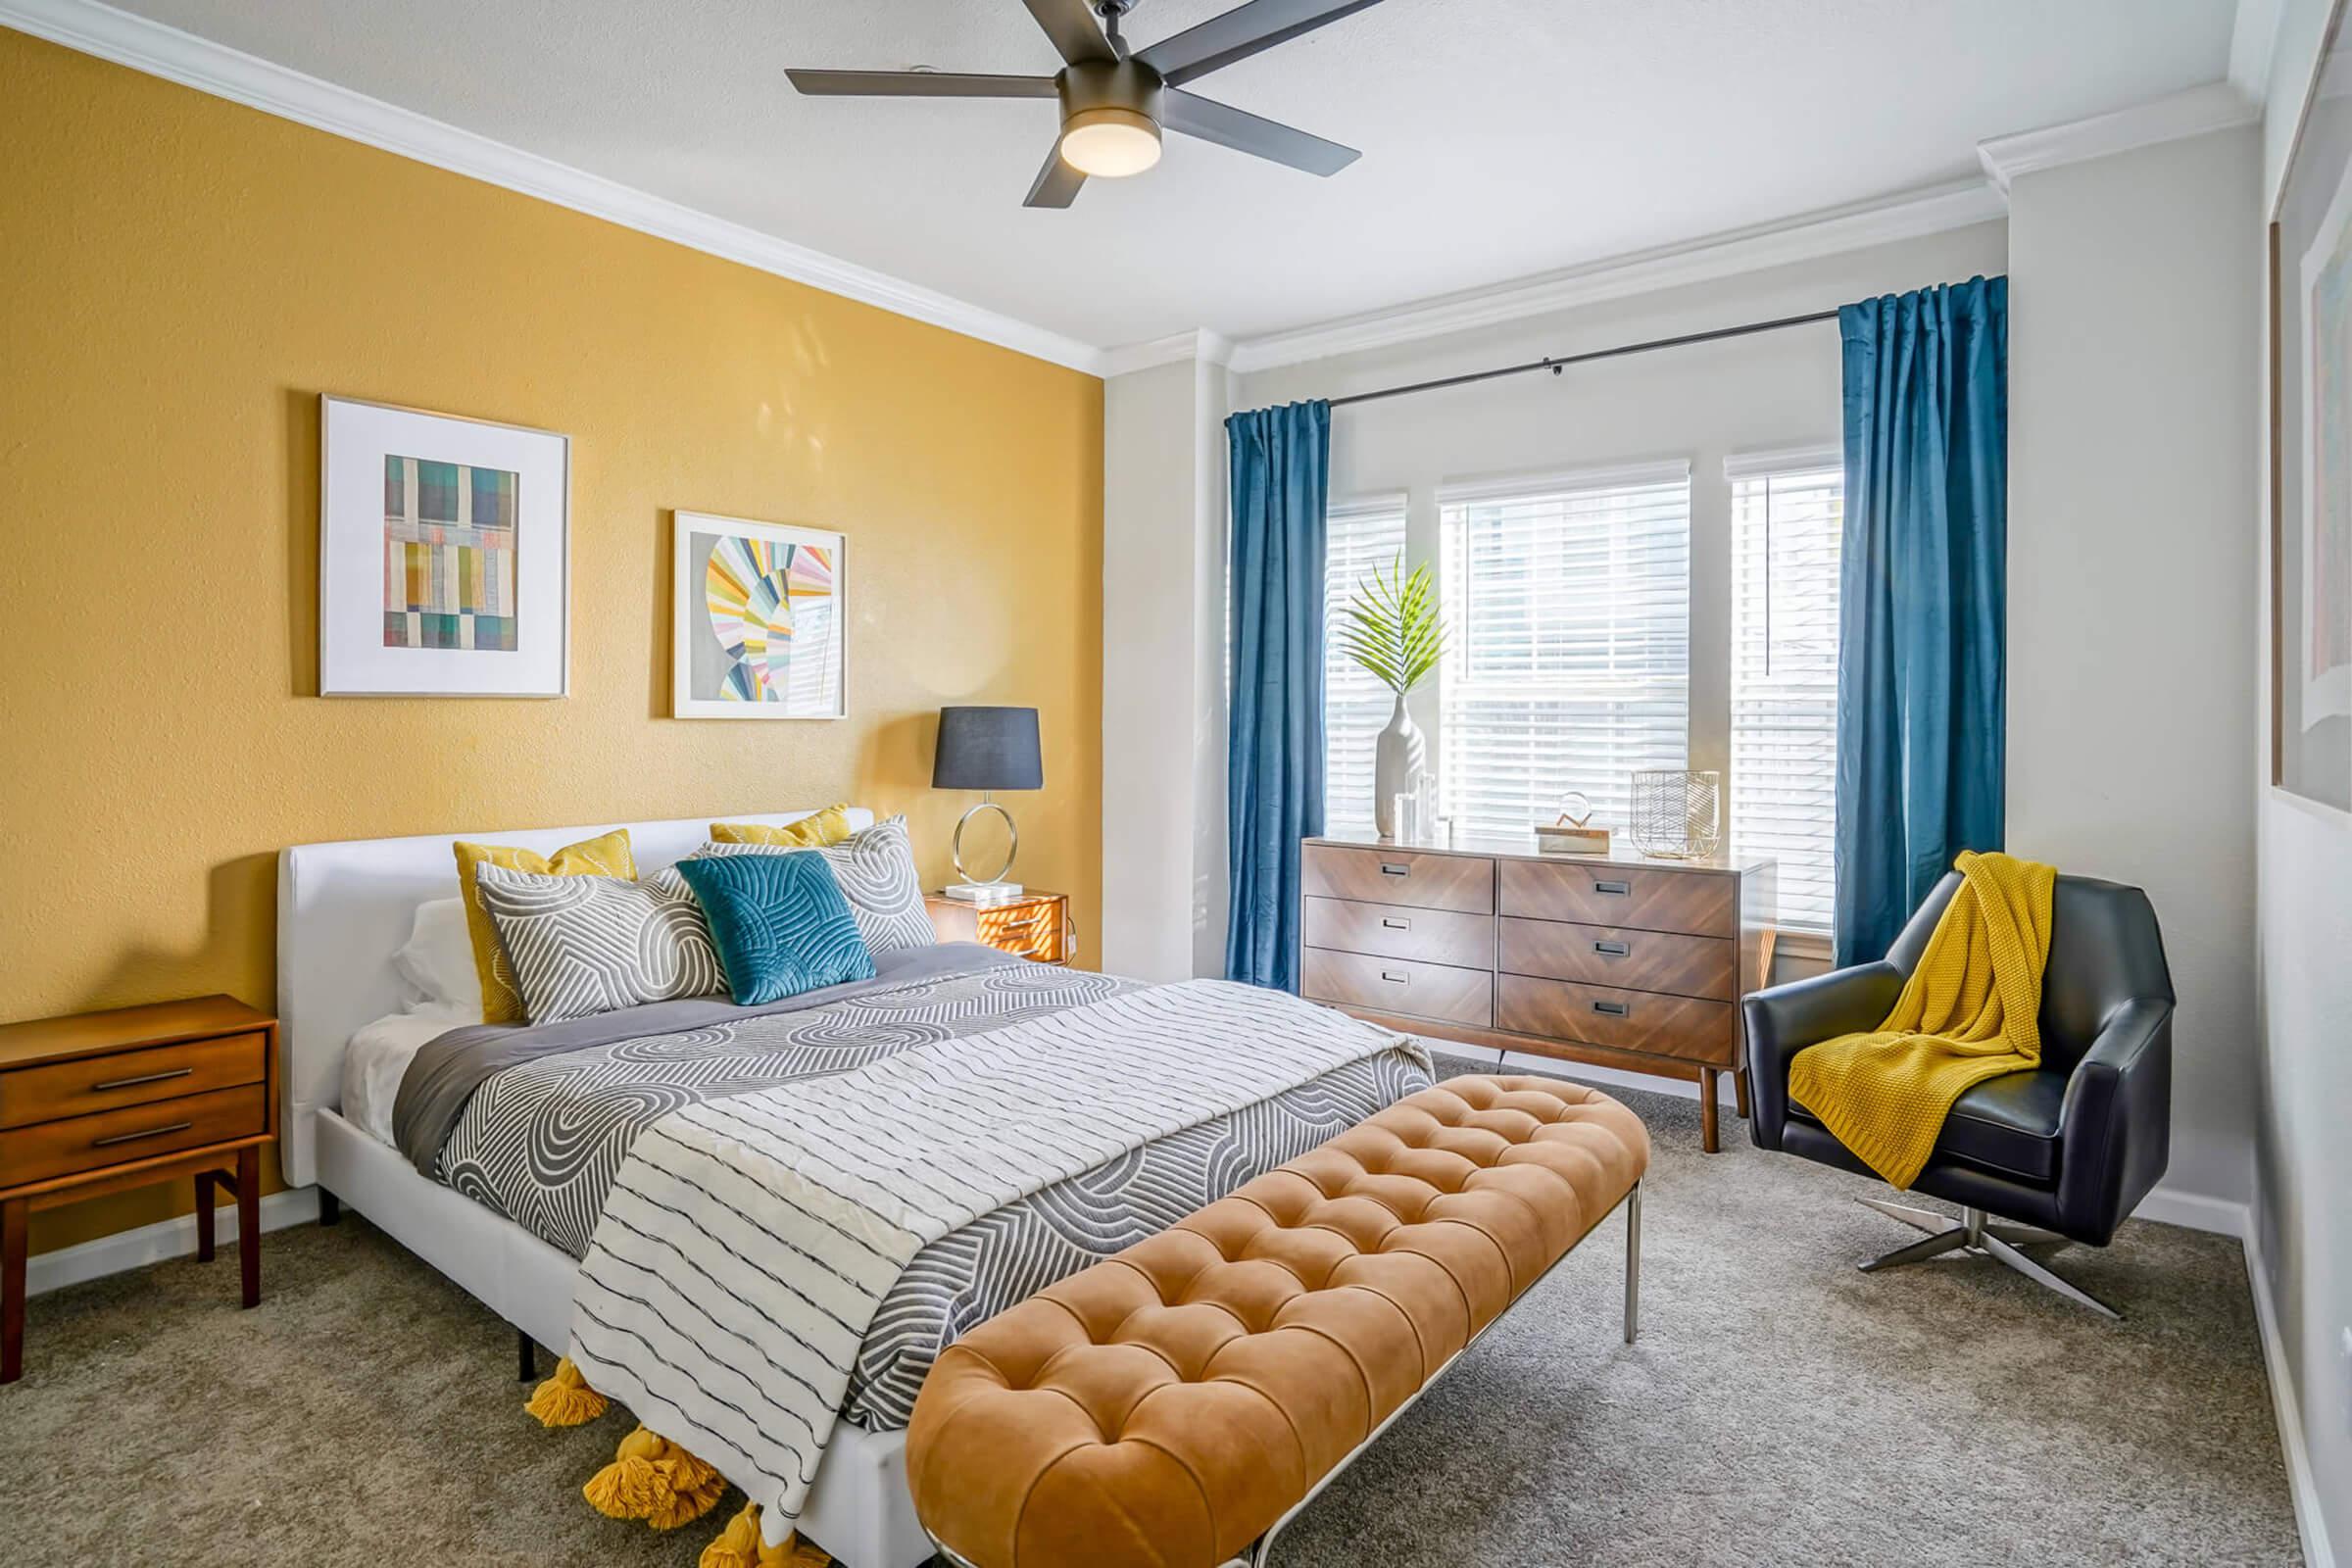 Bedroom with Ceiling Fan - Prisma Apartments - Albuquerque - New Mexico